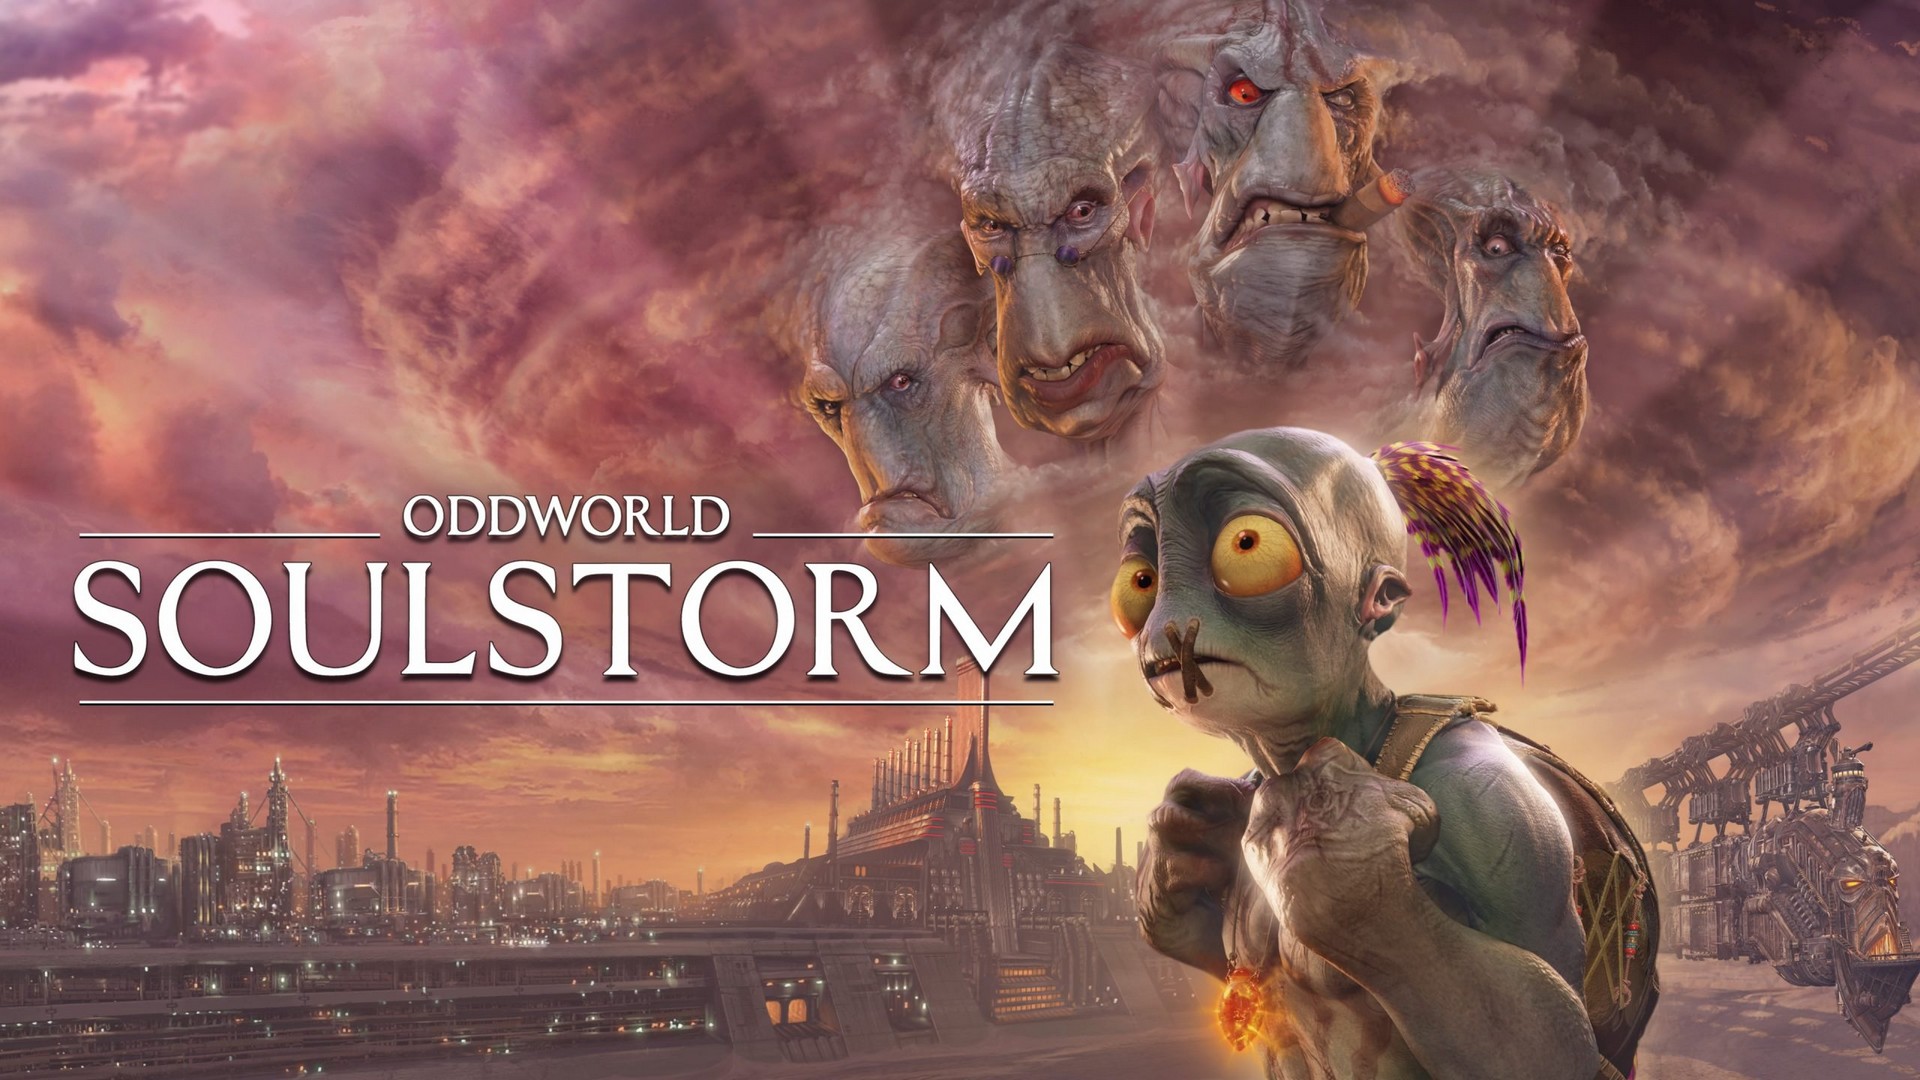 Embark On An Odd & Epic Journey With The Retail Editions Of Oddworld: Soulstorm, Now Available